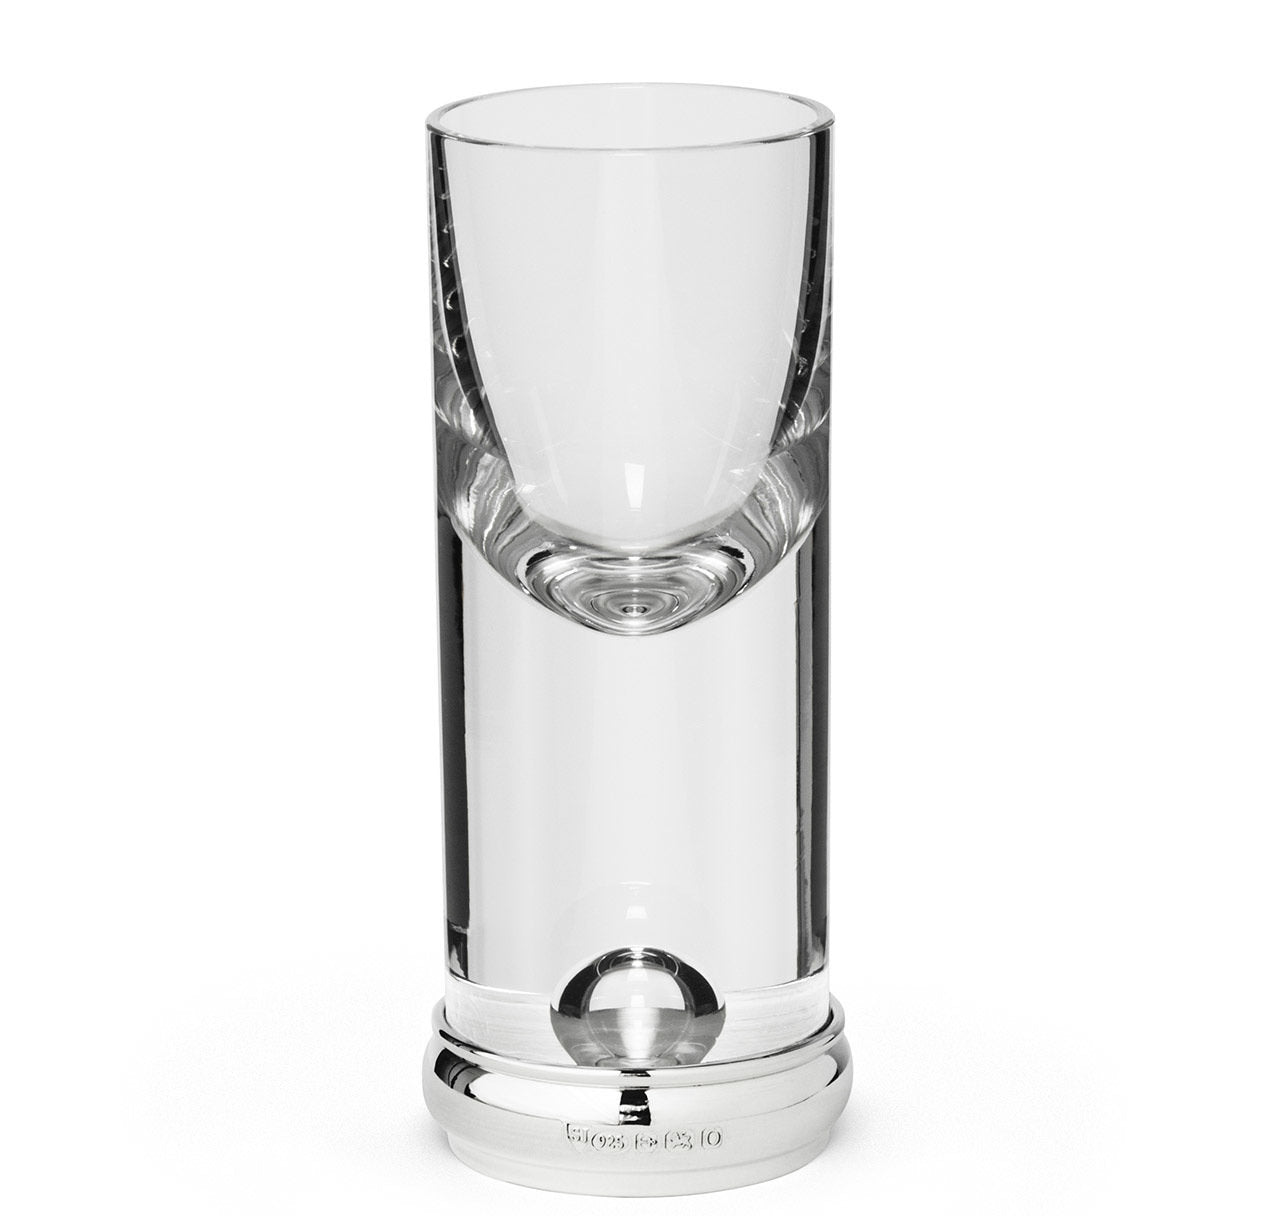 Sir Jack's Sterling Silver & Crystal Tall Shot Glass Set